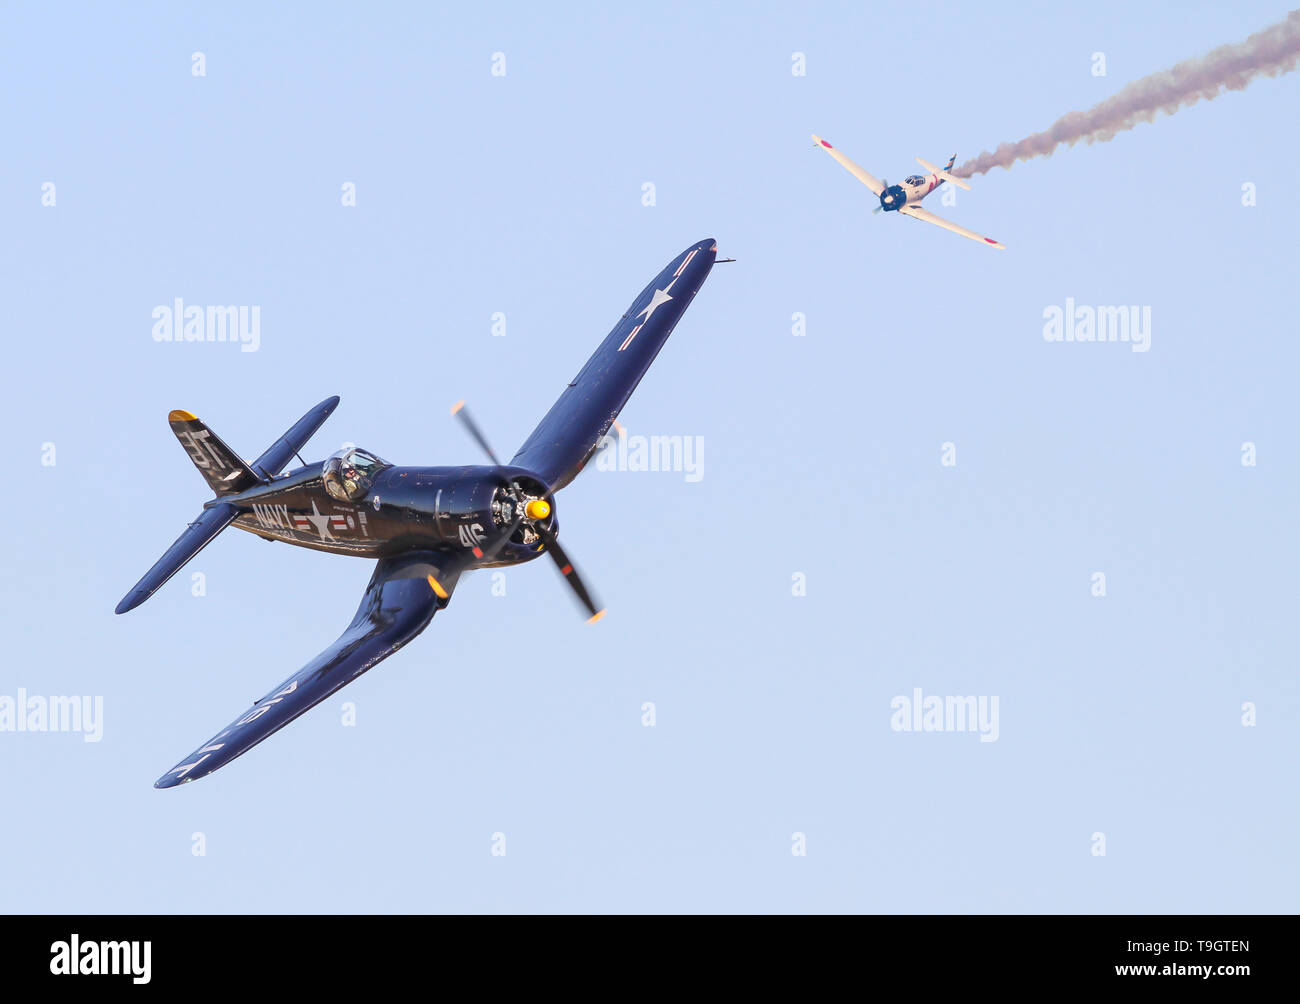 A Japanese Zero fighter plane pursues a U.S. Vought F4U Corsair fighter in a recreation of a World War II dogfight in the Pacific Theater. Stock Photo